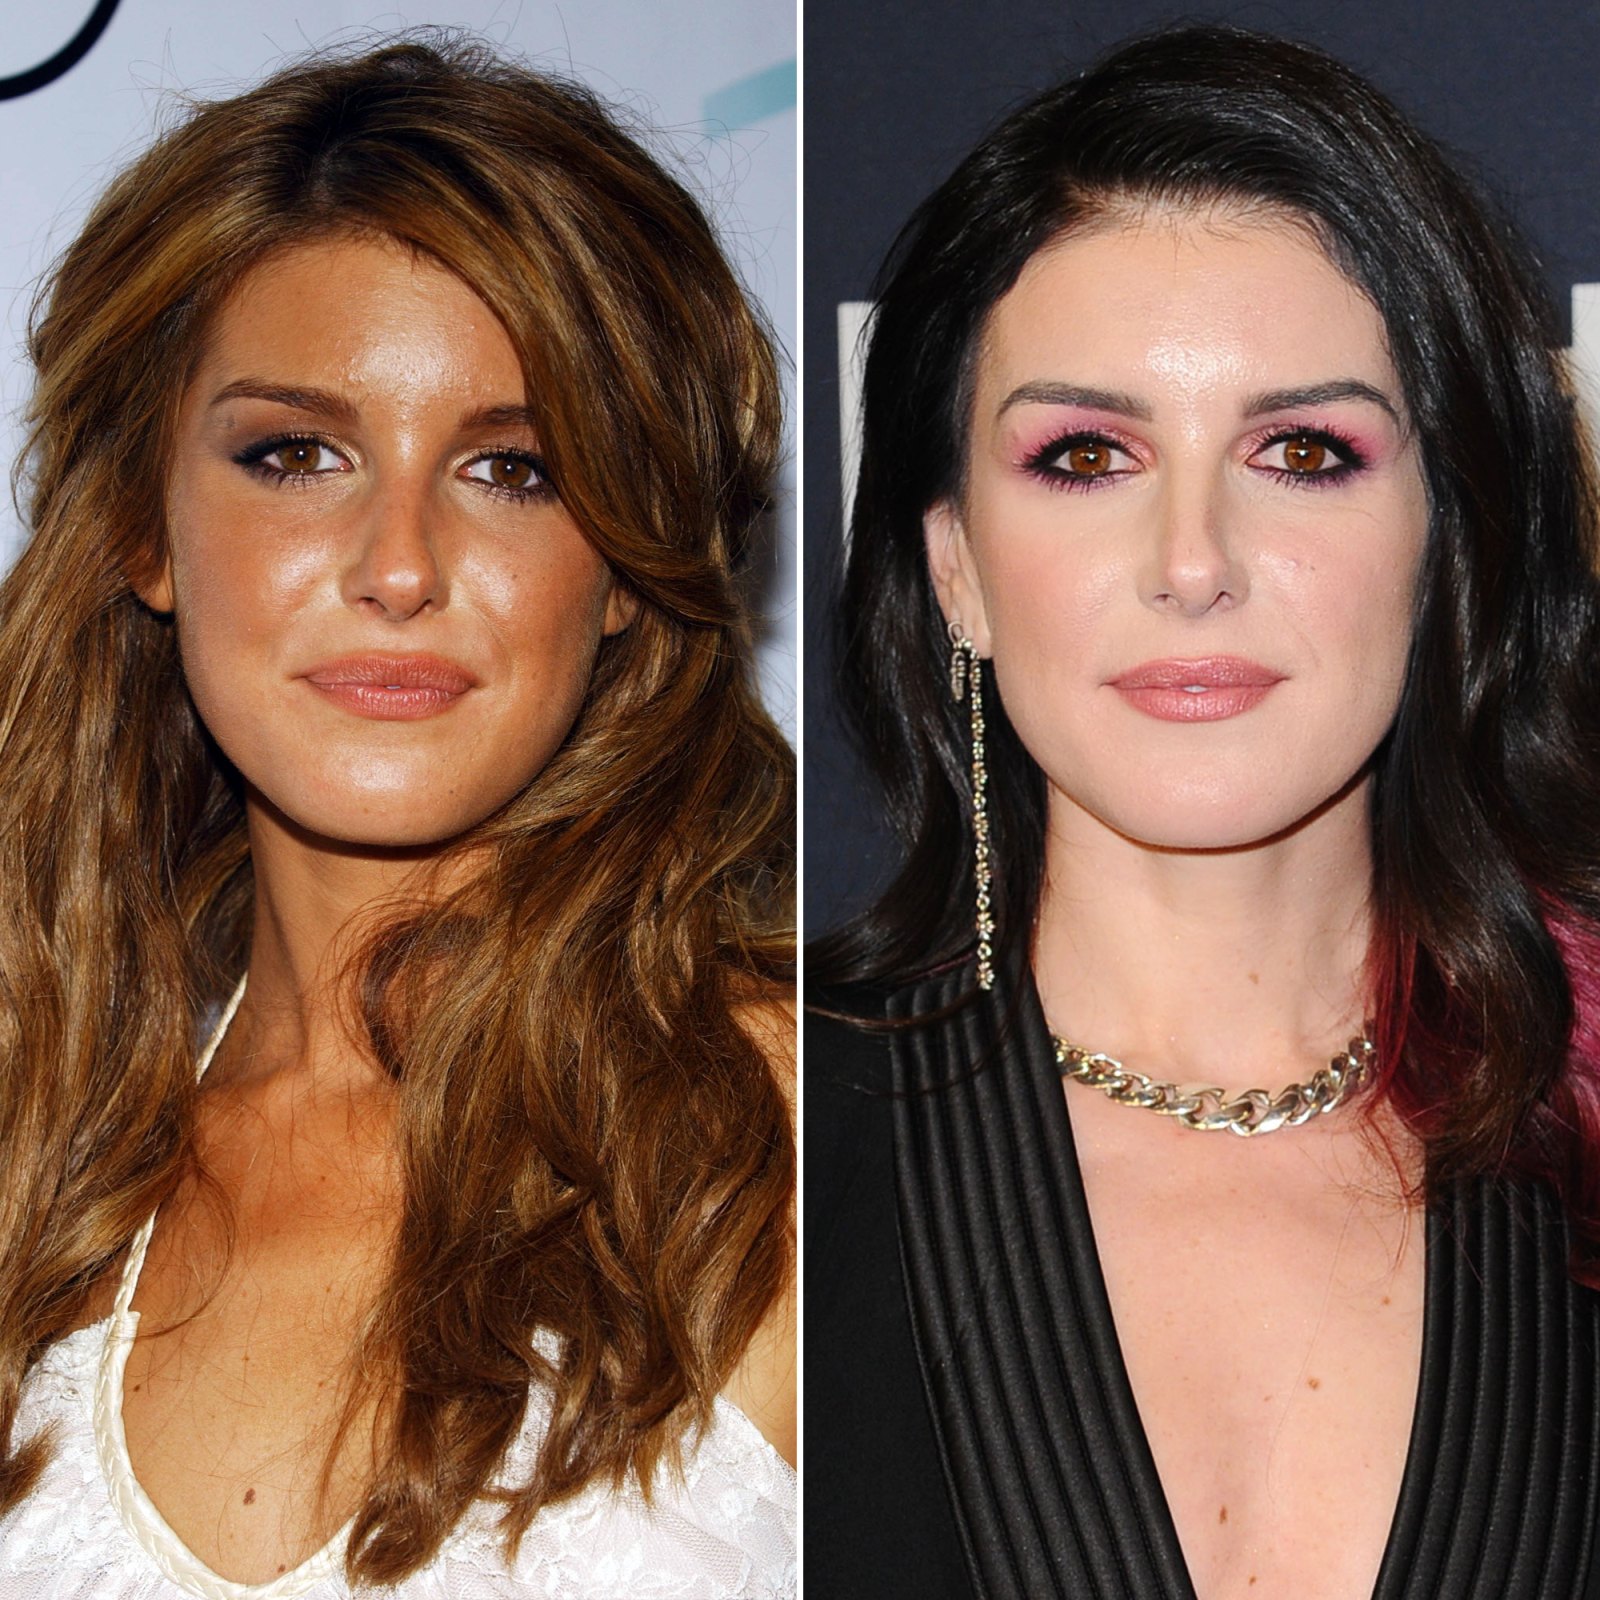 The CW's '90210': Where Are They Now? Shenae Grimes